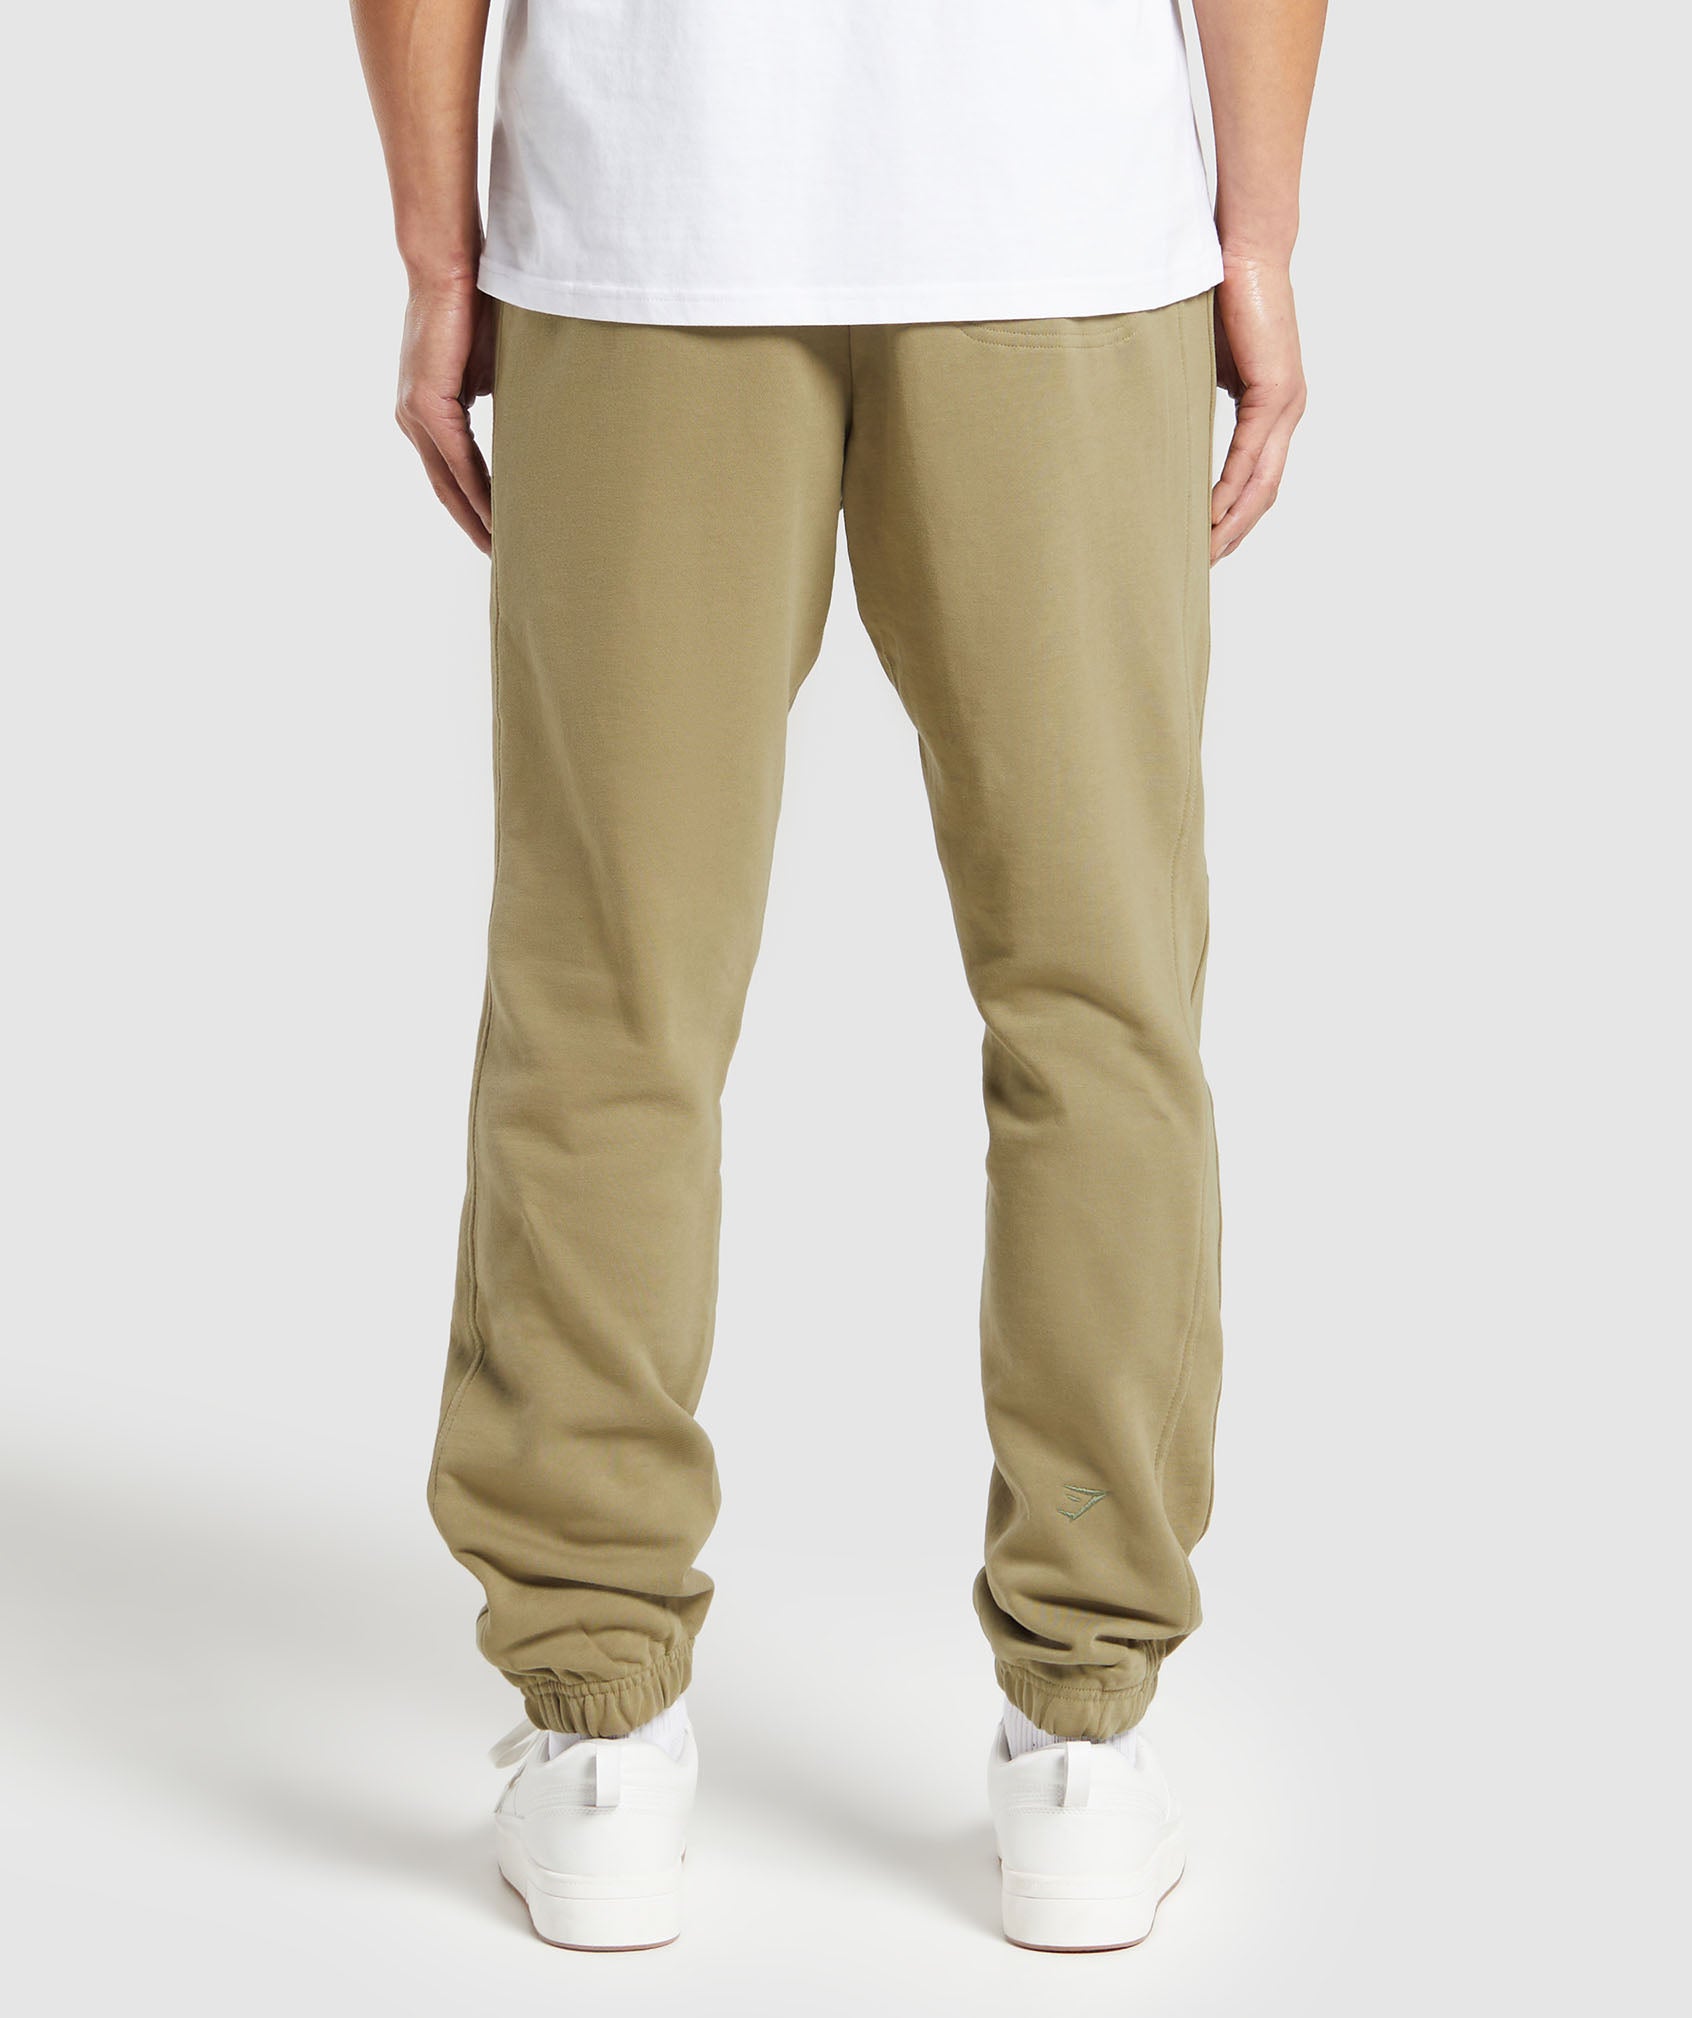 Rest Day Essentials Joggers in Troop Green - view 2